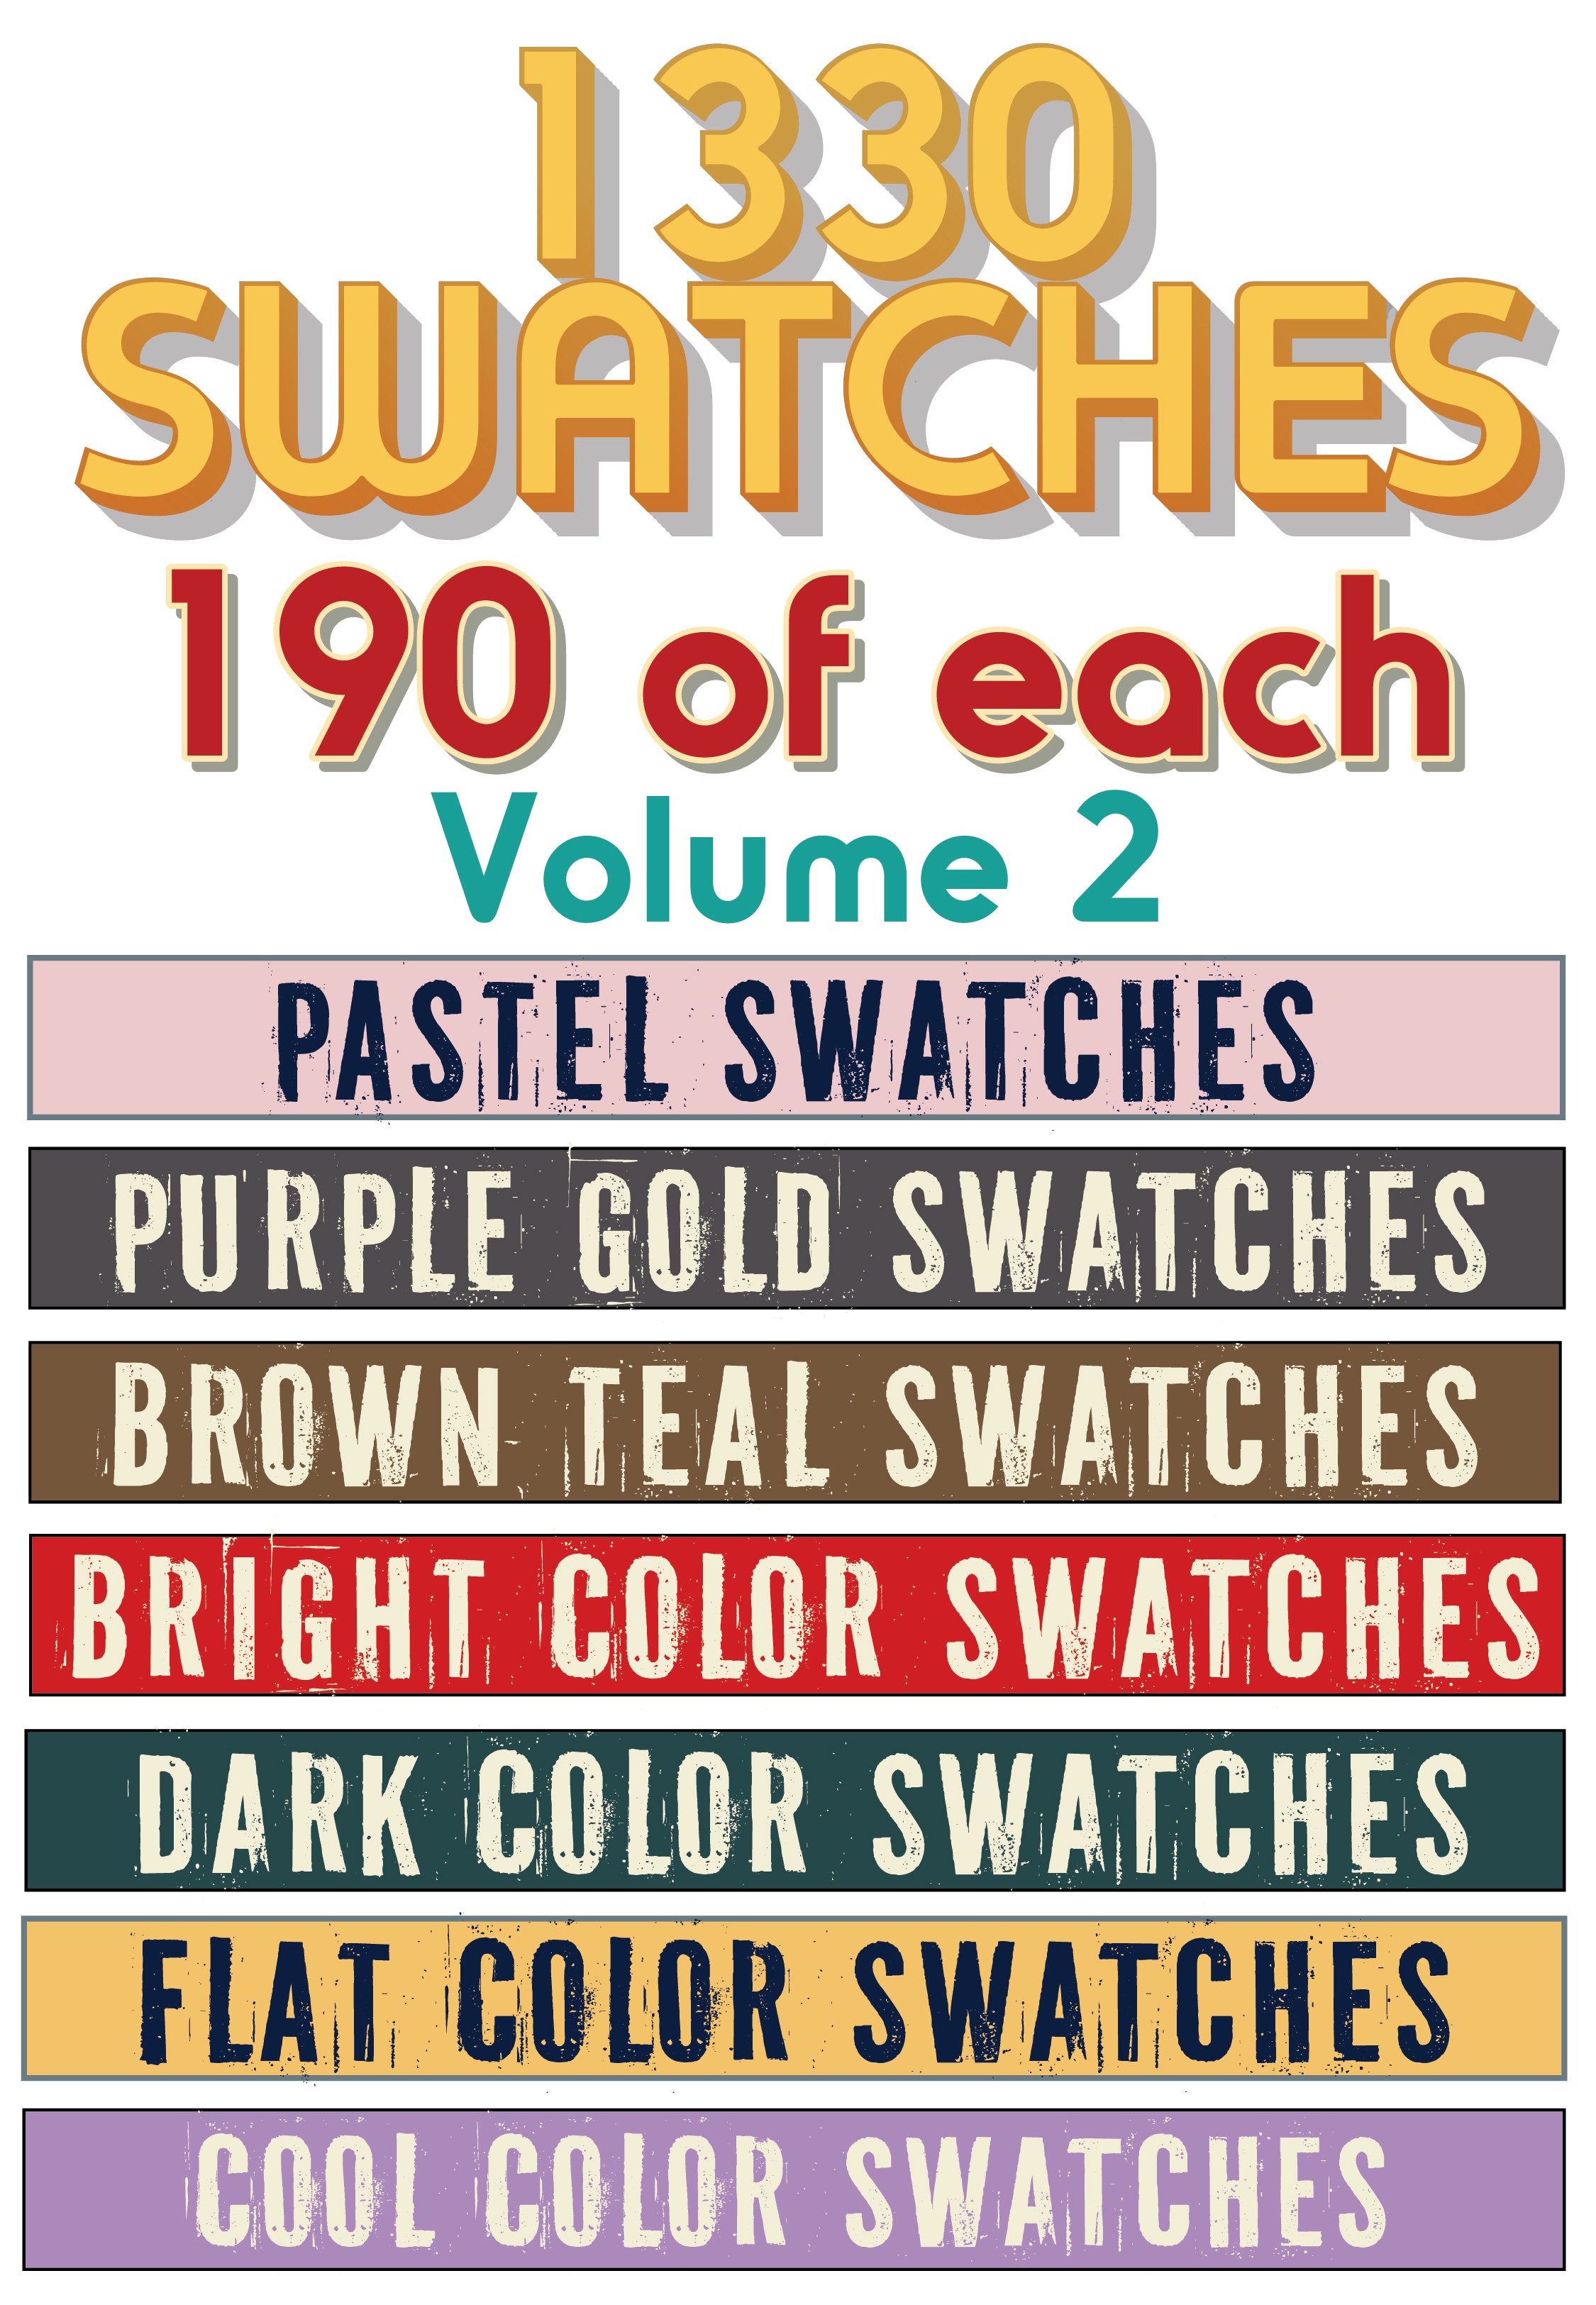 1330 Swatches - Volume 2cover image.